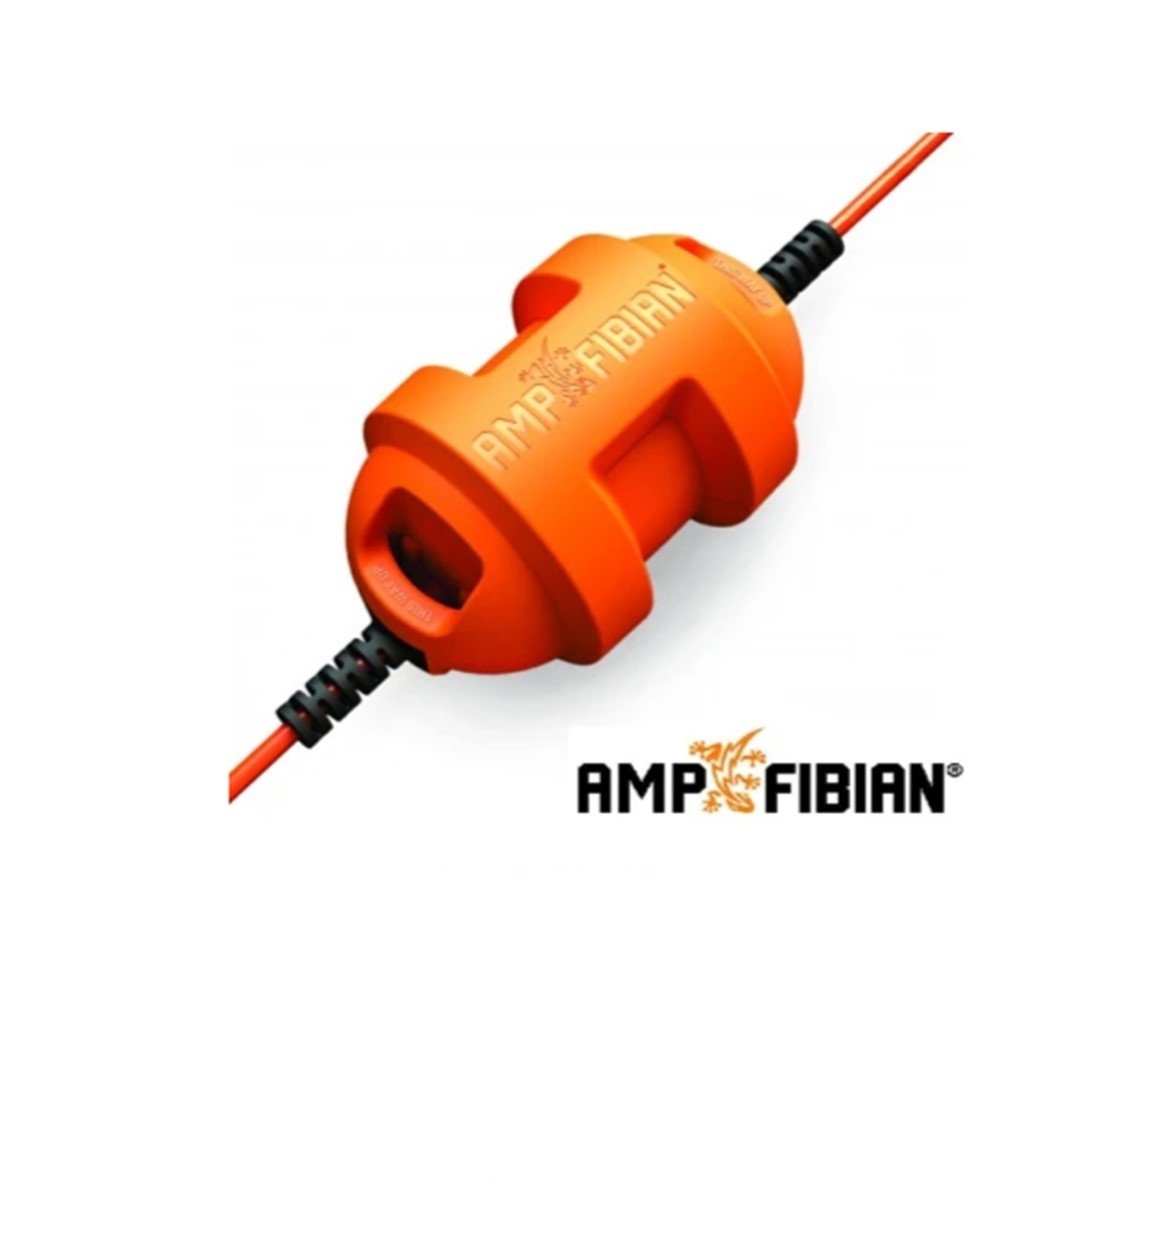 Ampfibian Mini Power Adaptor 15a To 10a With Rcd & Overload Protection